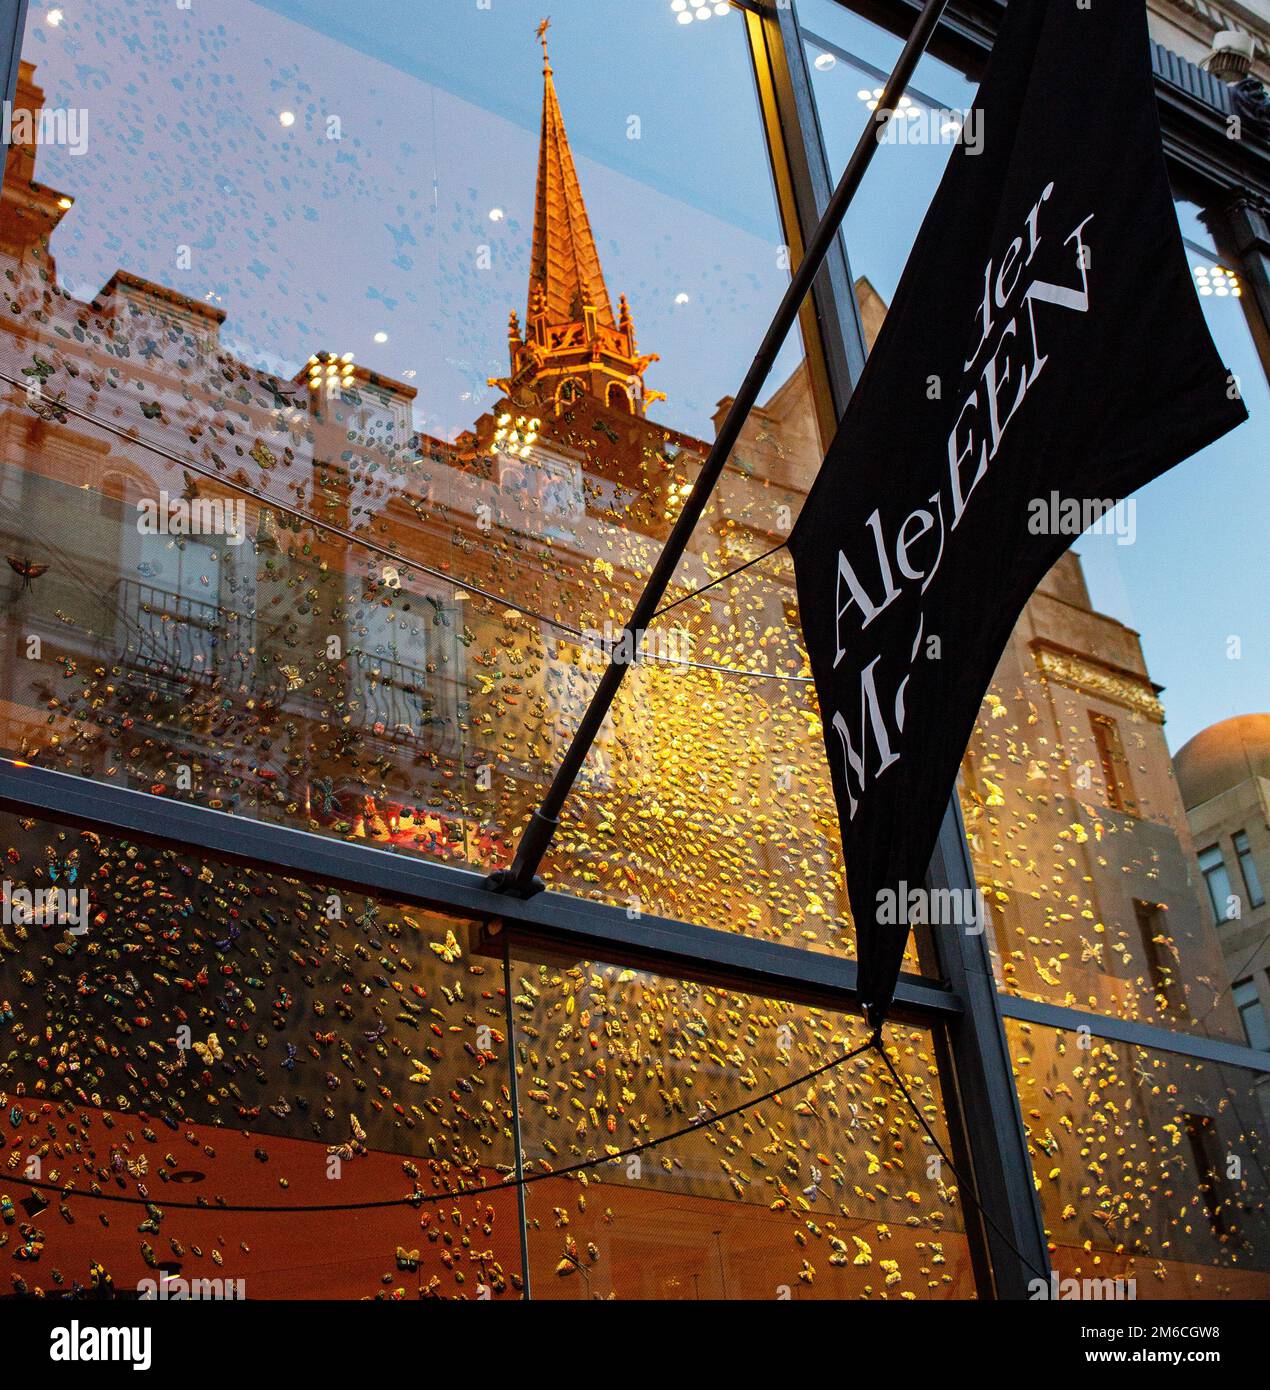 A shop sign of Alexander Mcqueen in Paris, on April 9, 2020 in Paris,  France. Photo by David Niviere/ABACAPRESS.COM Stock Photo - Alamy